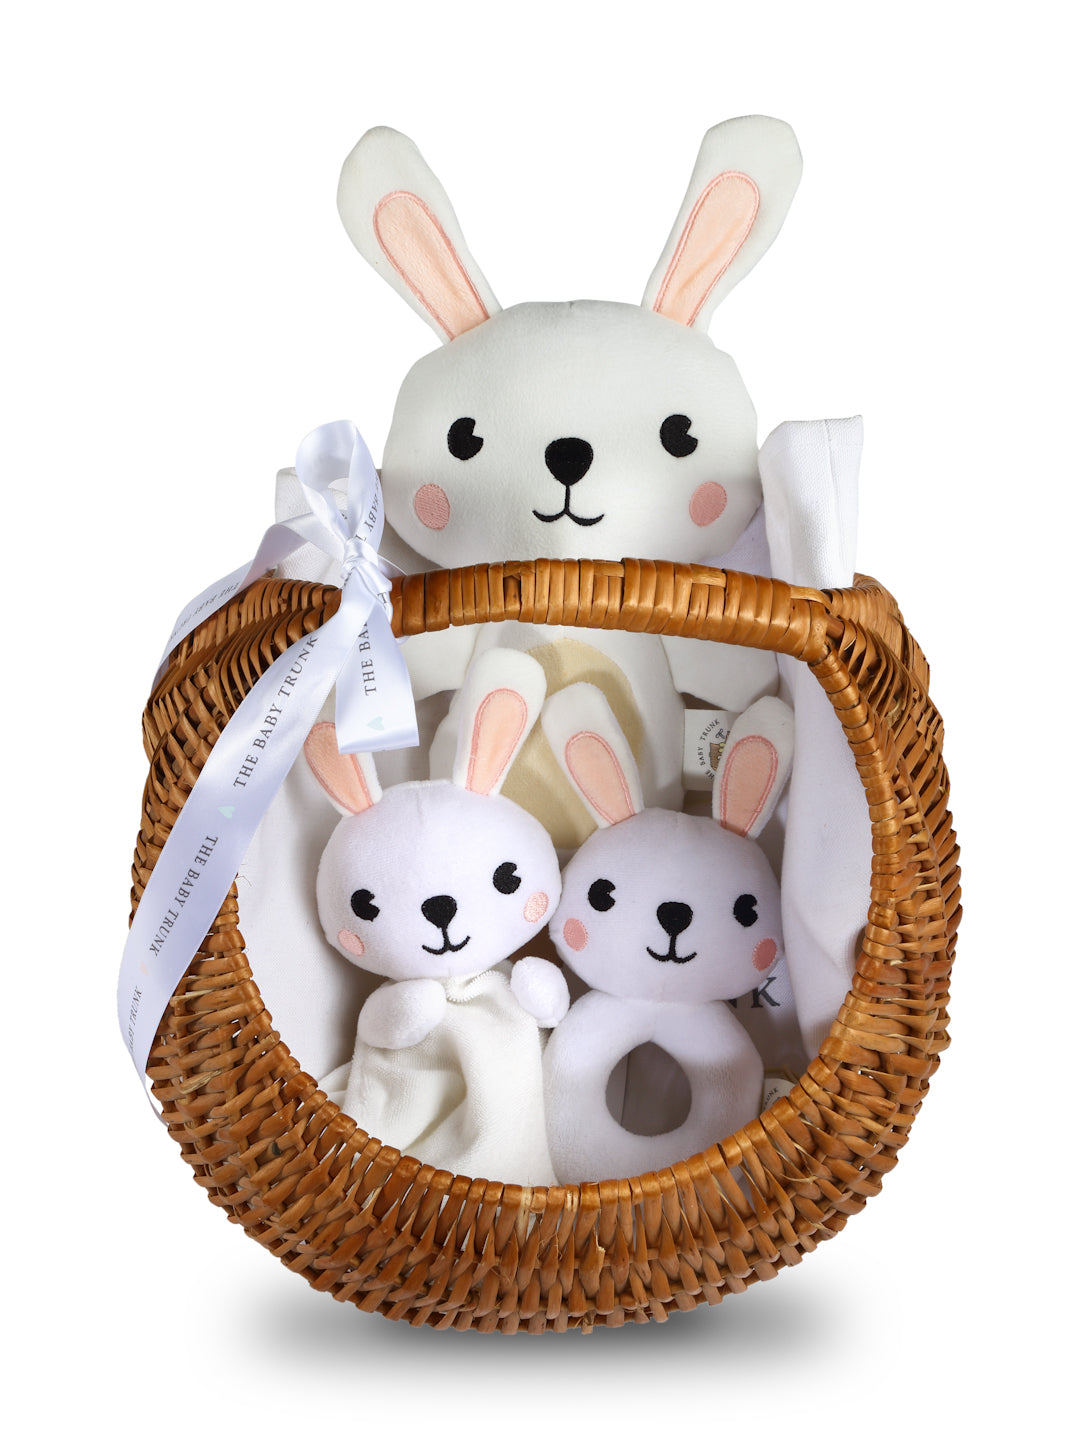 Forested Bunny gift set